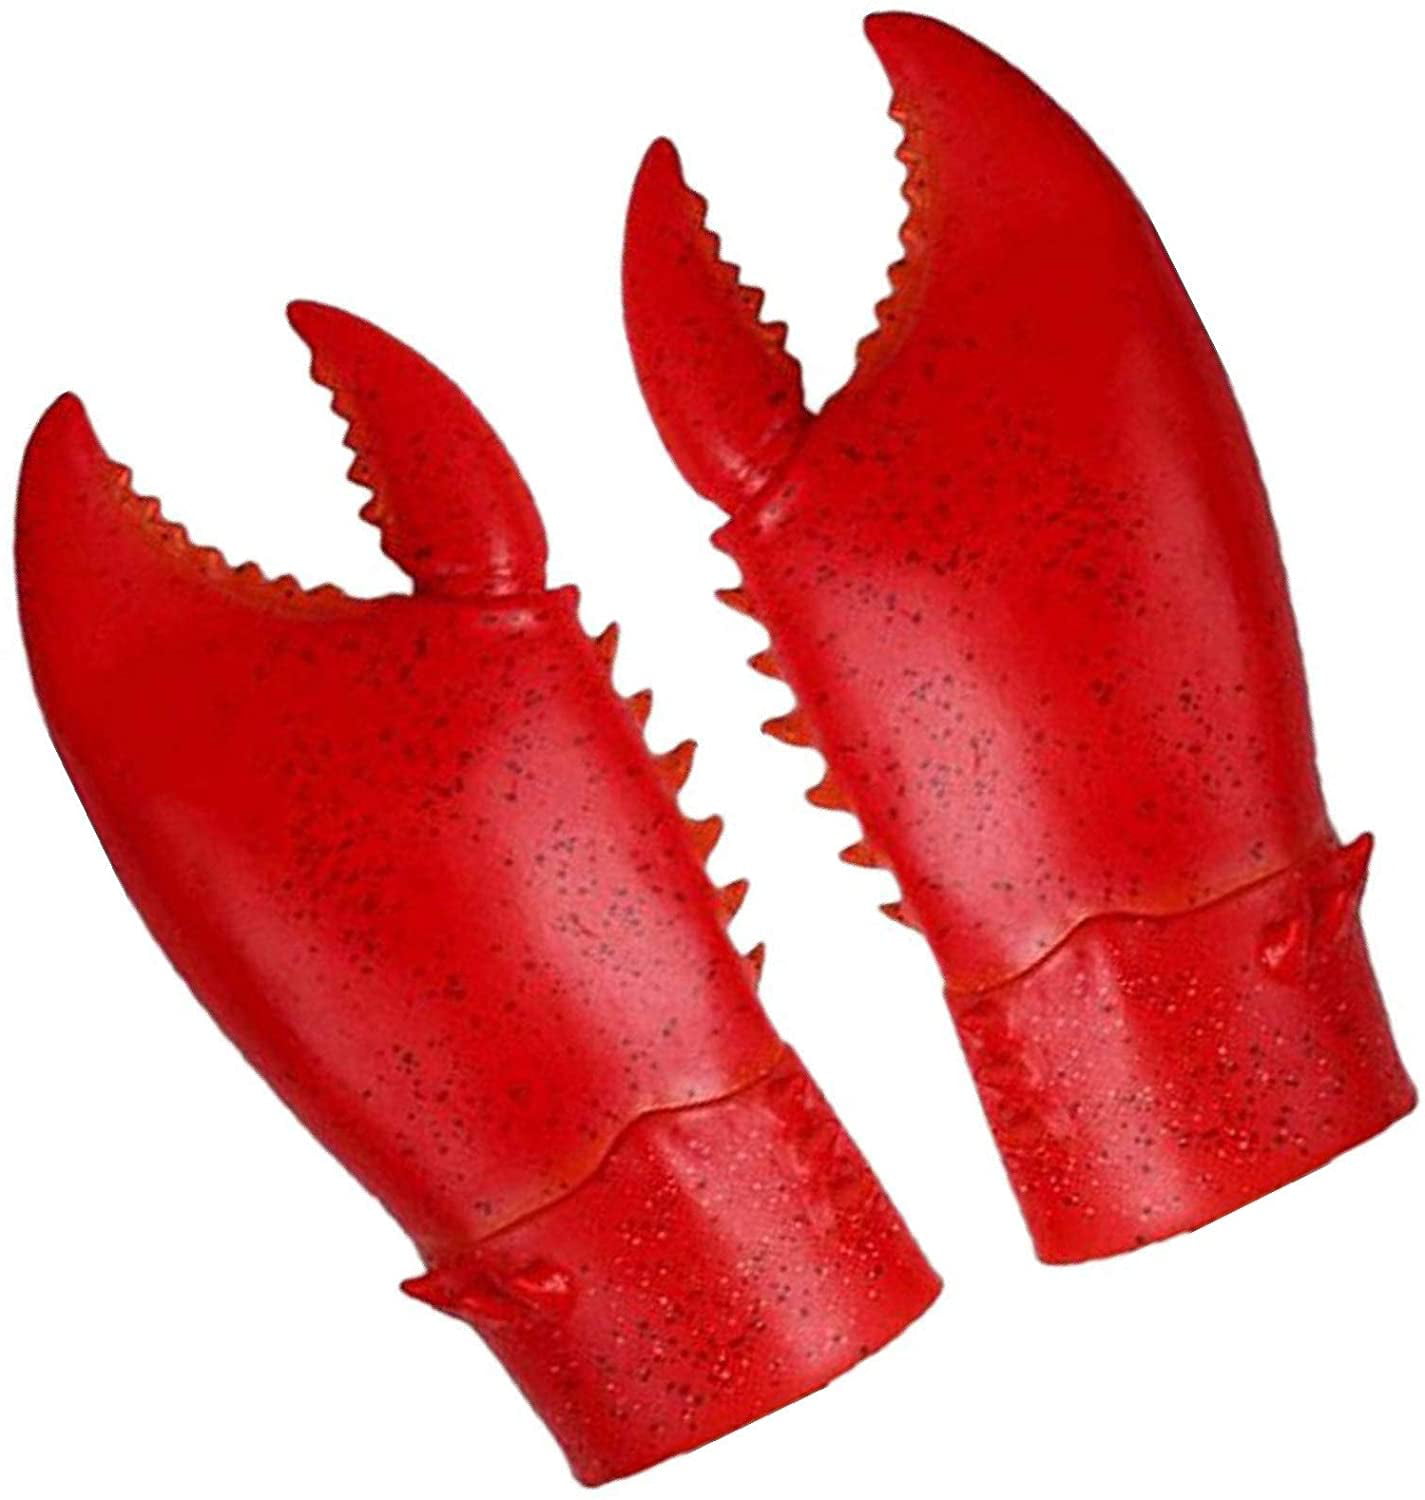 Funny Lobster Crab Claws Gloves Weapons Cosplay Amor Halloween Costume Props Novelty DIY Toy for Kids 